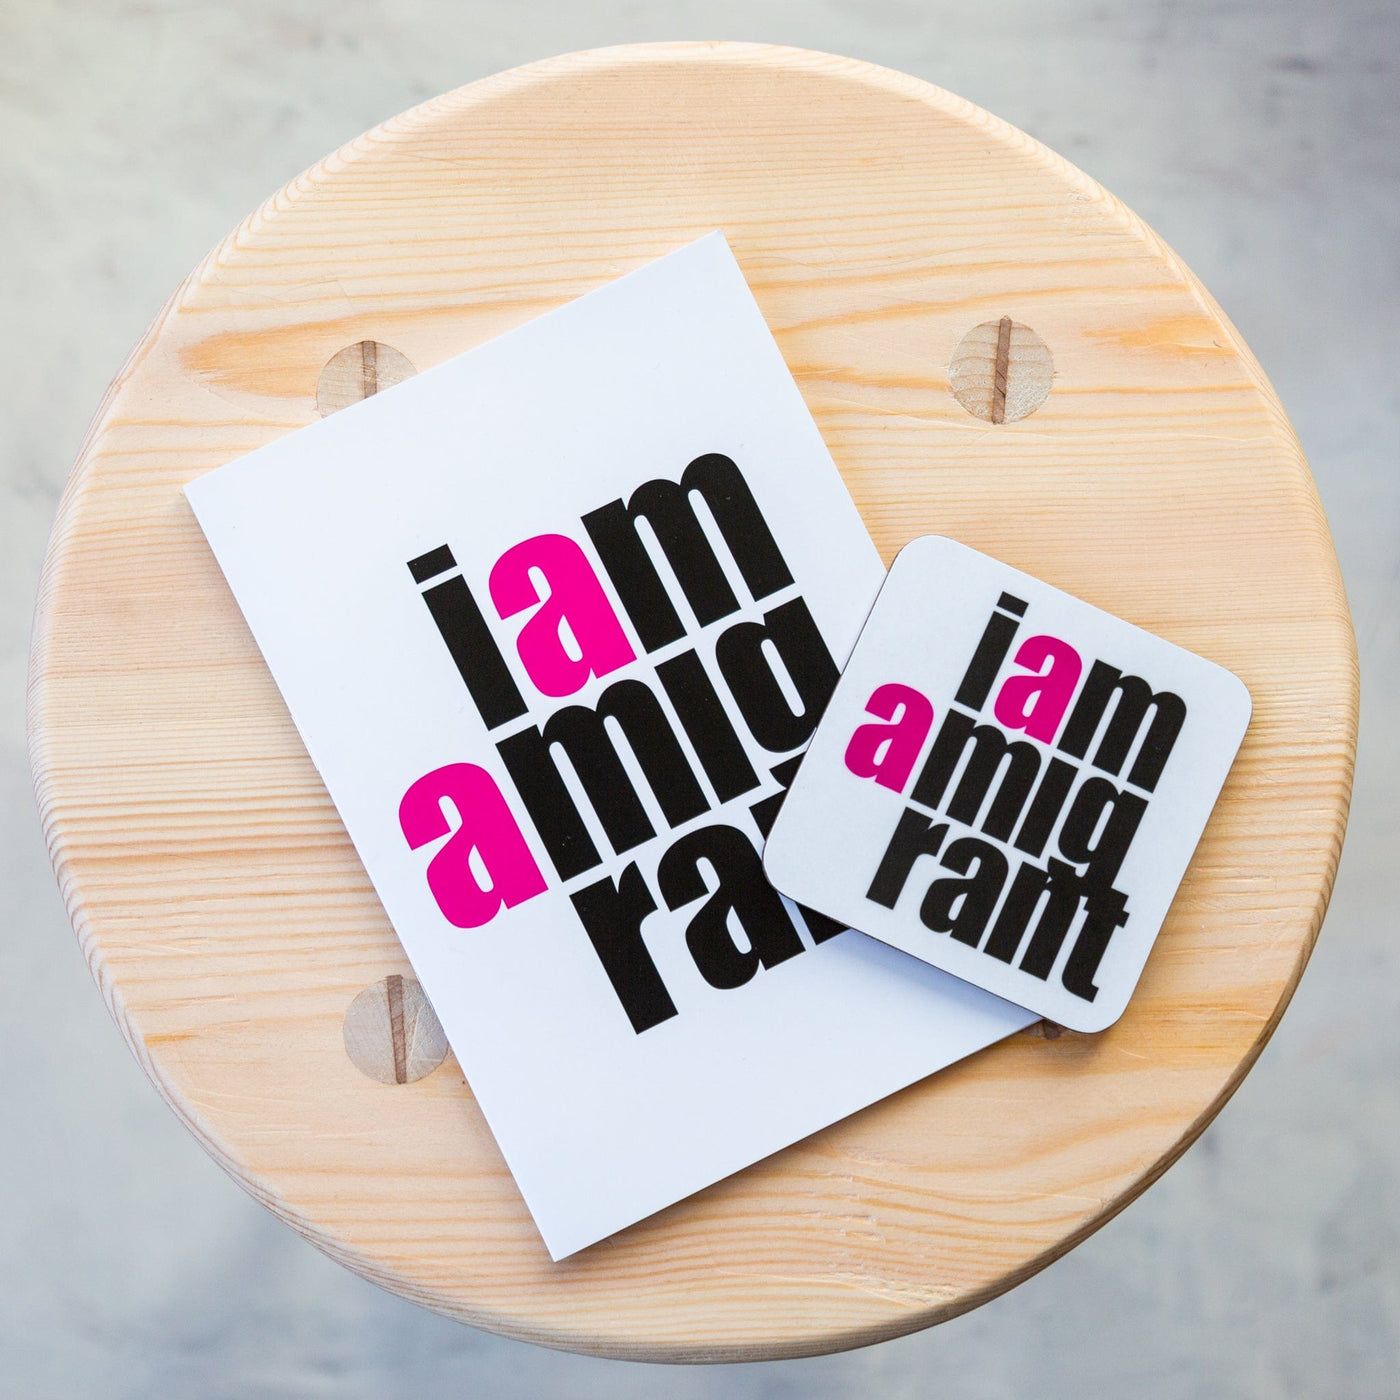 Migration Museum Gift Suitcase - I Am a Migrant